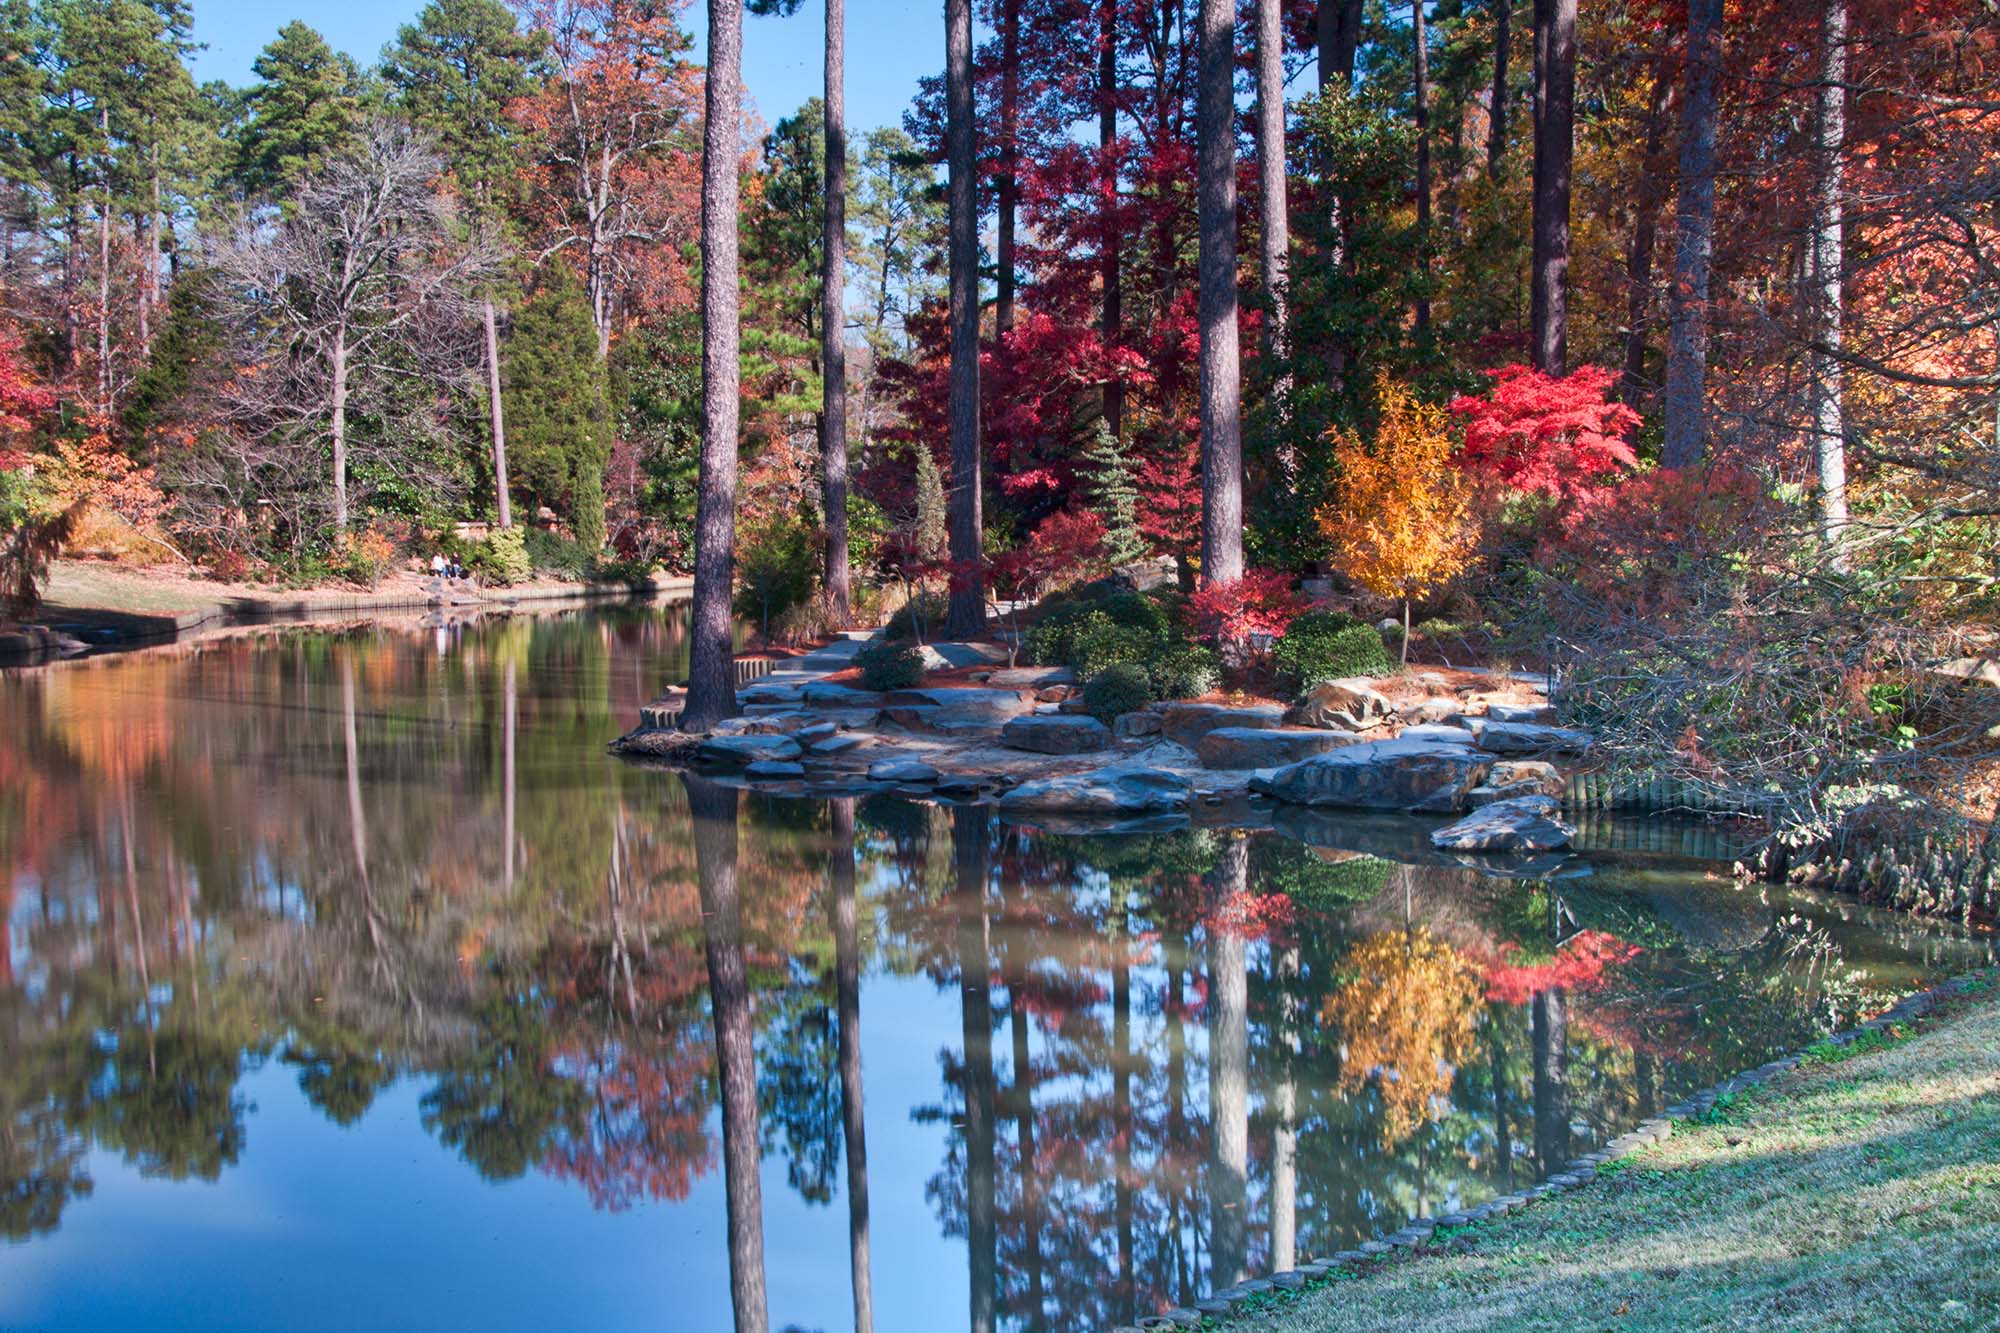 A fall view of the Asiatic Arboretum pond. Photo by Rick Fisher.